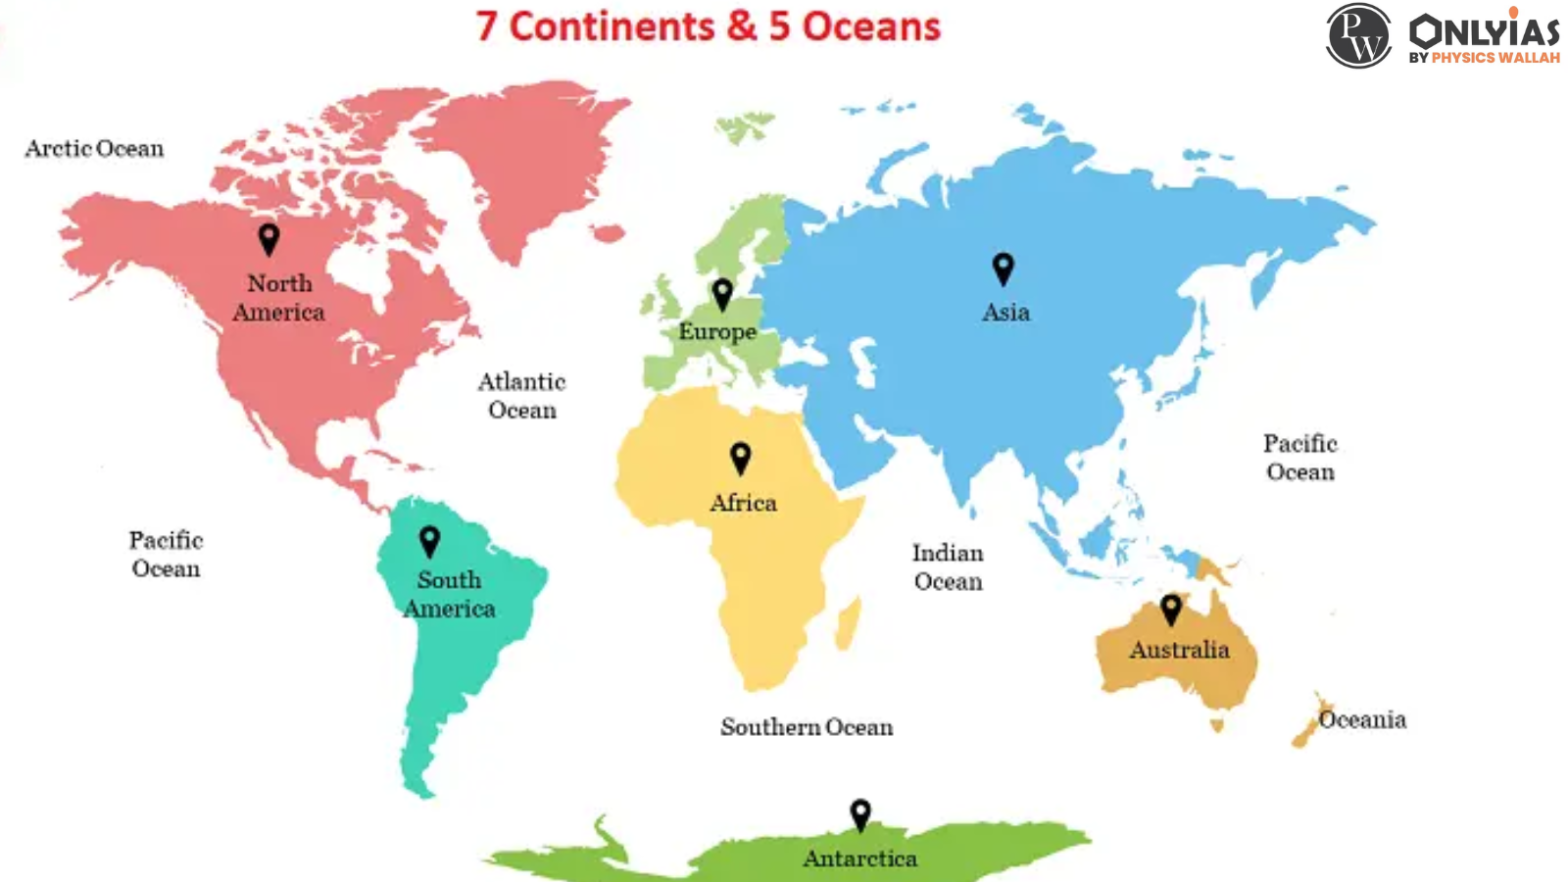 7 Continents and 5 Oceans in Order of the World